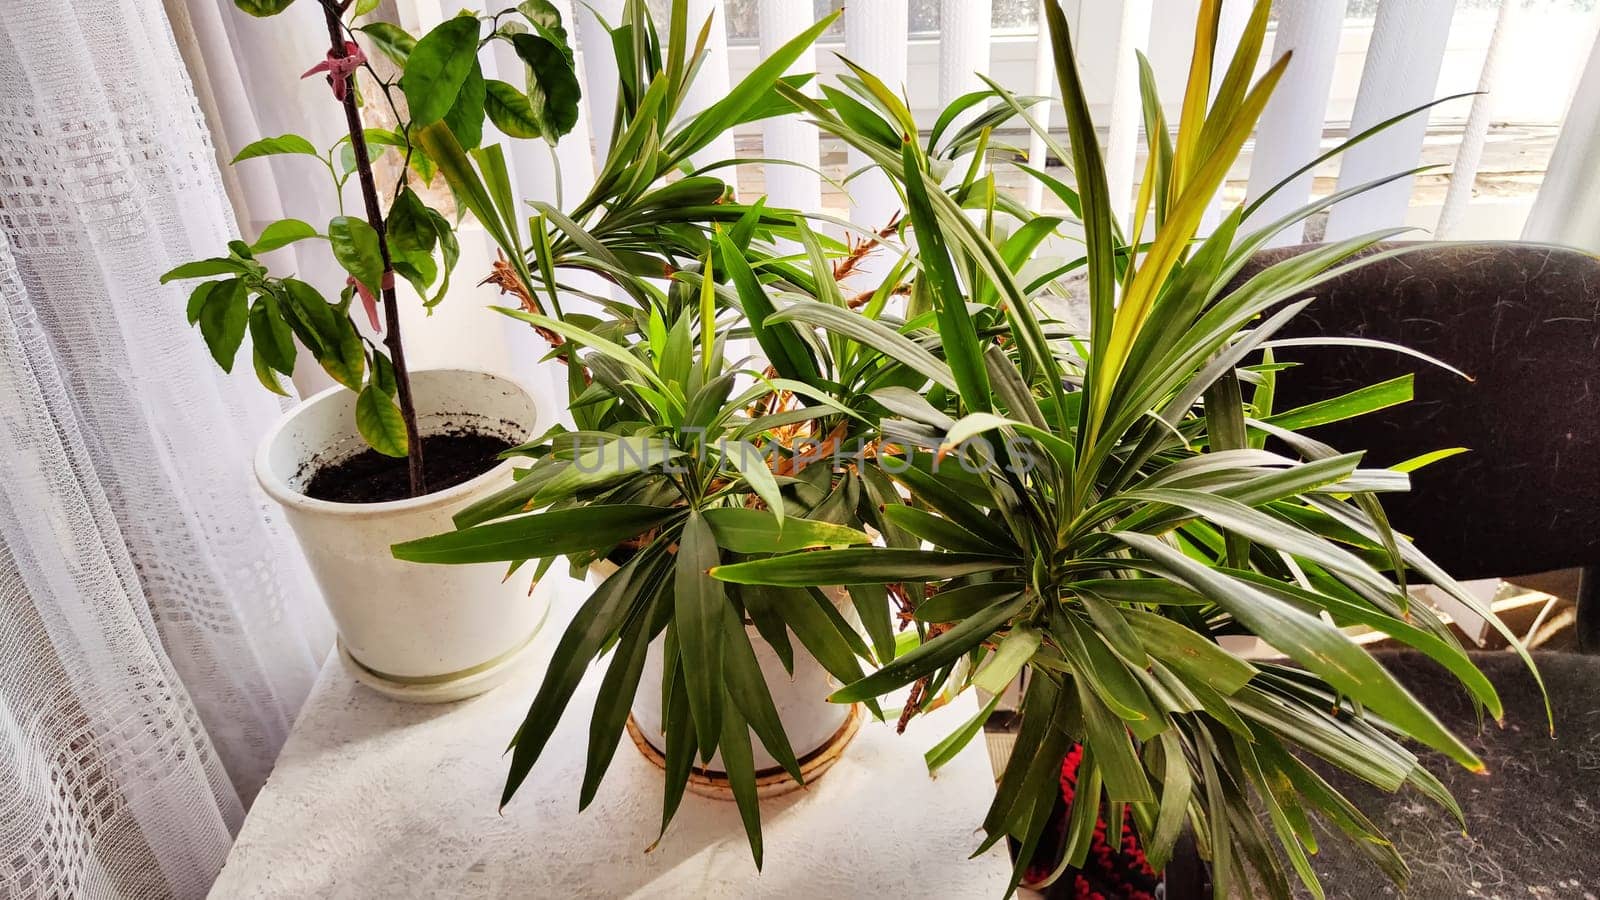 Part of the interior, green indoor plants by the window with a translucent white curtains. Bright cozy corner by the window with plants. Winter garden in the room or home